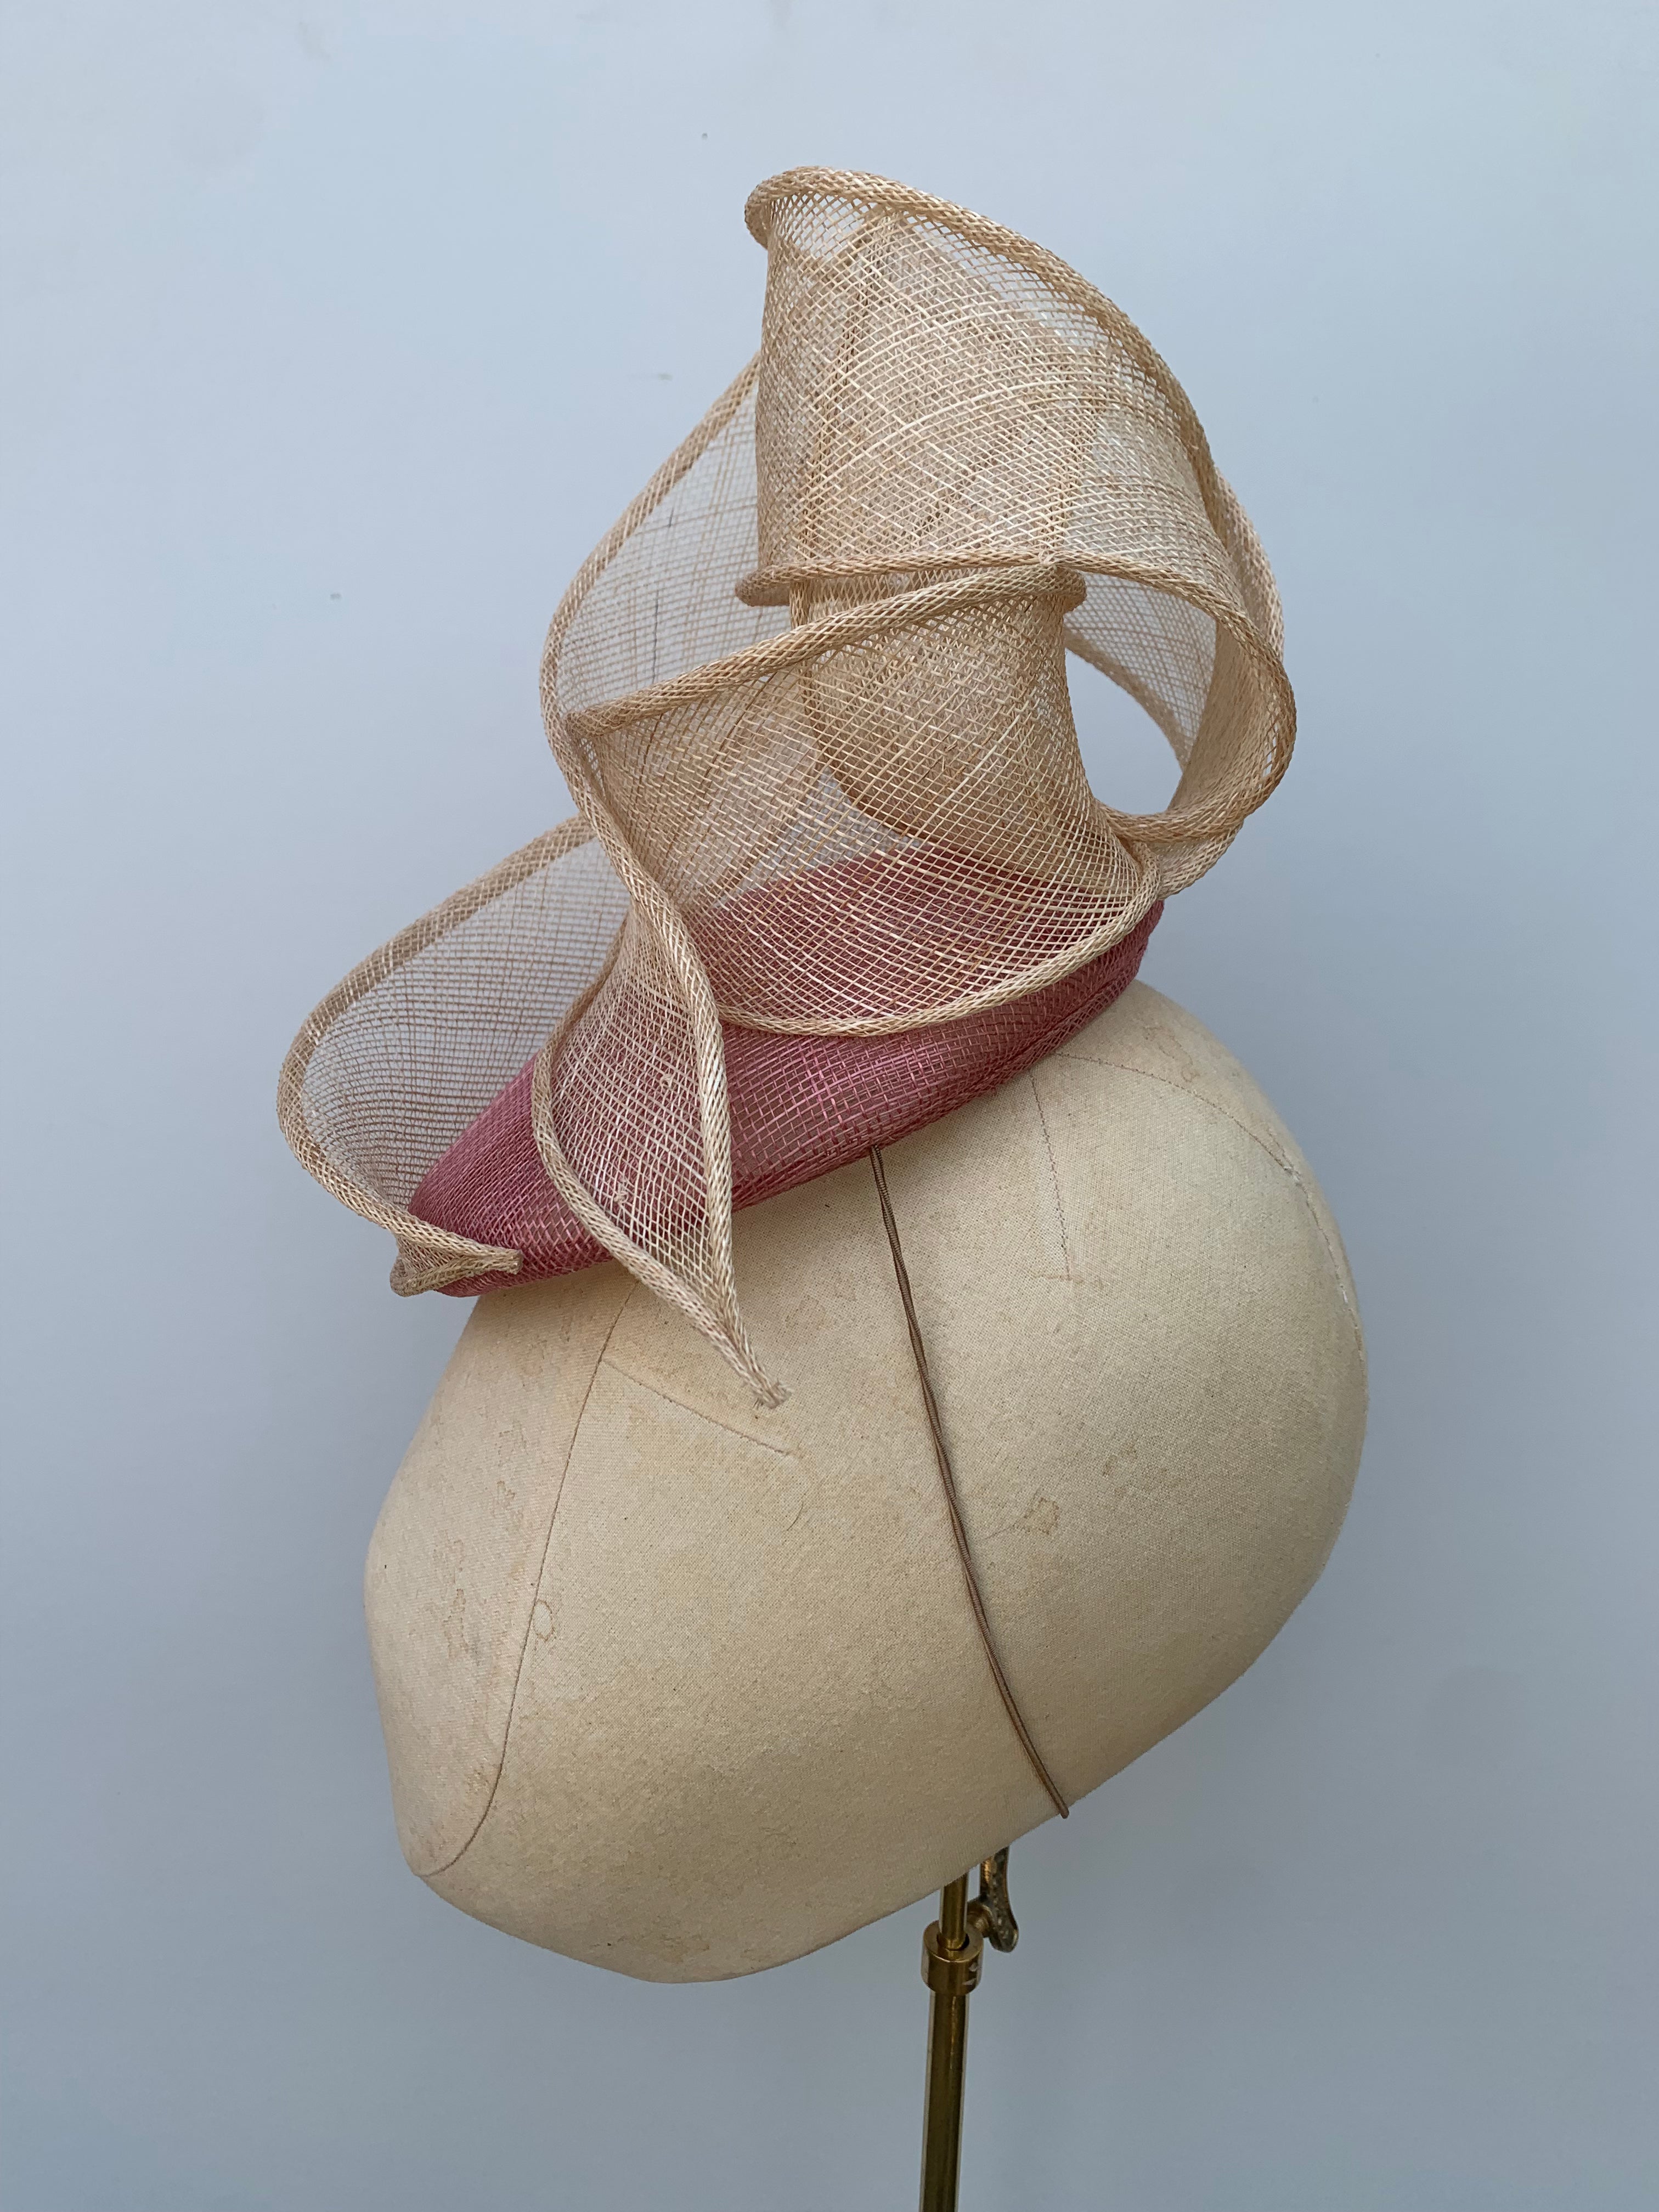 Signature Sculpture in blush pink and beige